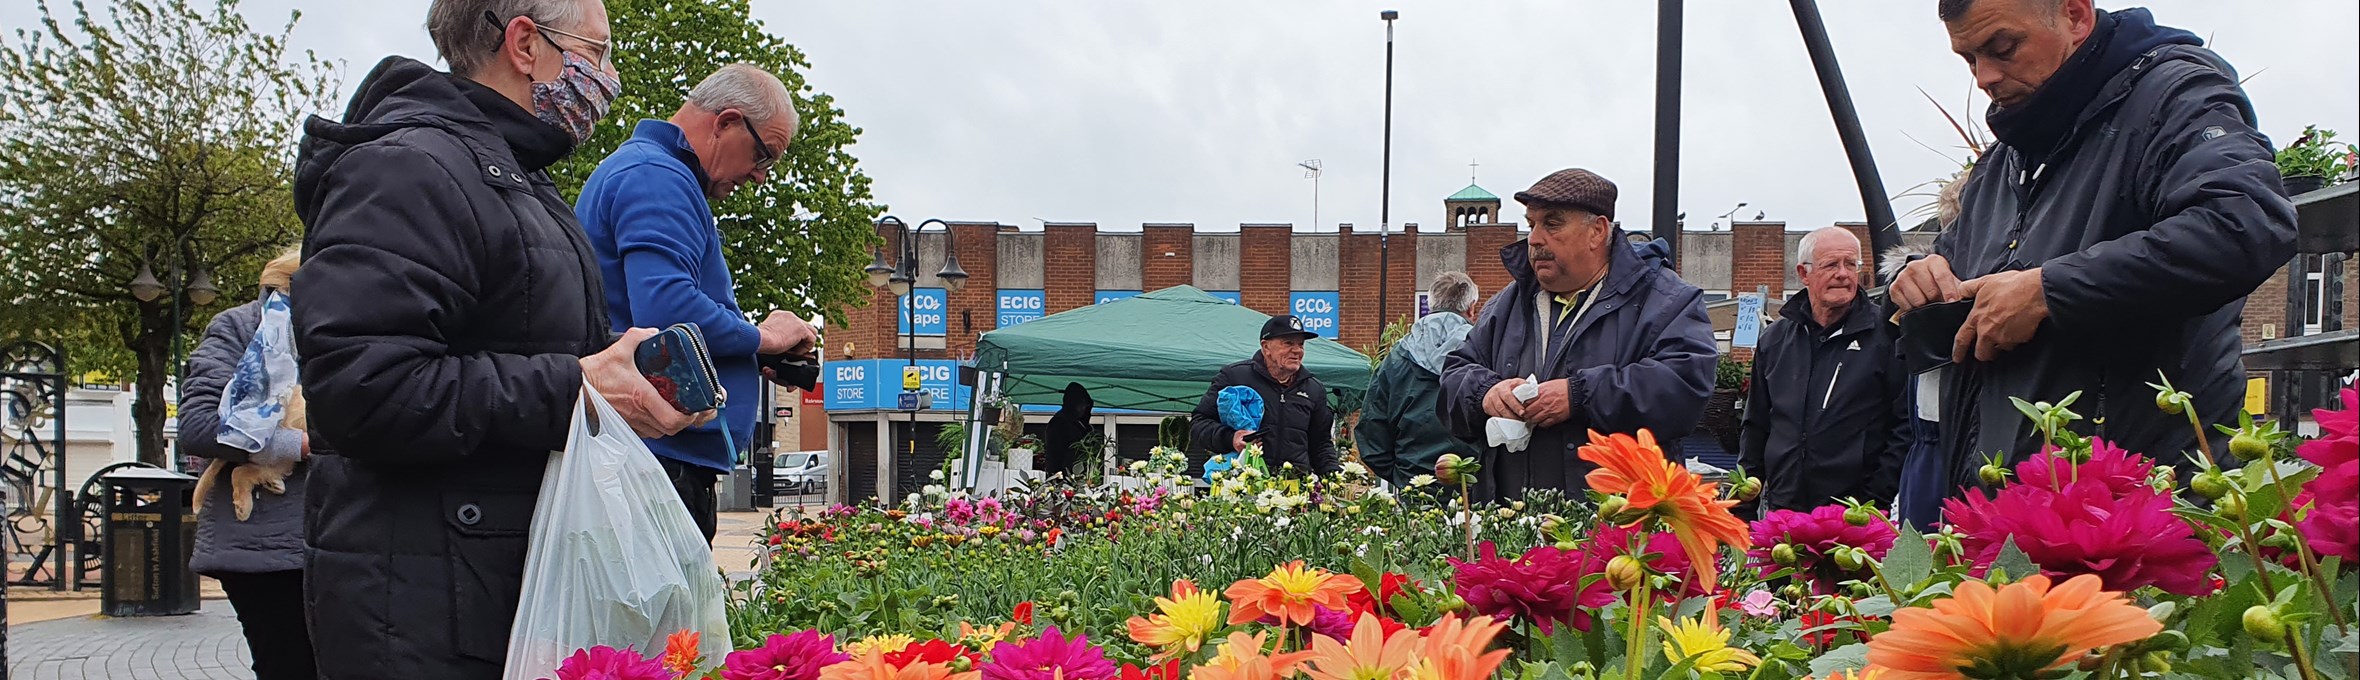 people look at a colourful display of dahlias on Portland Square in Sutton 